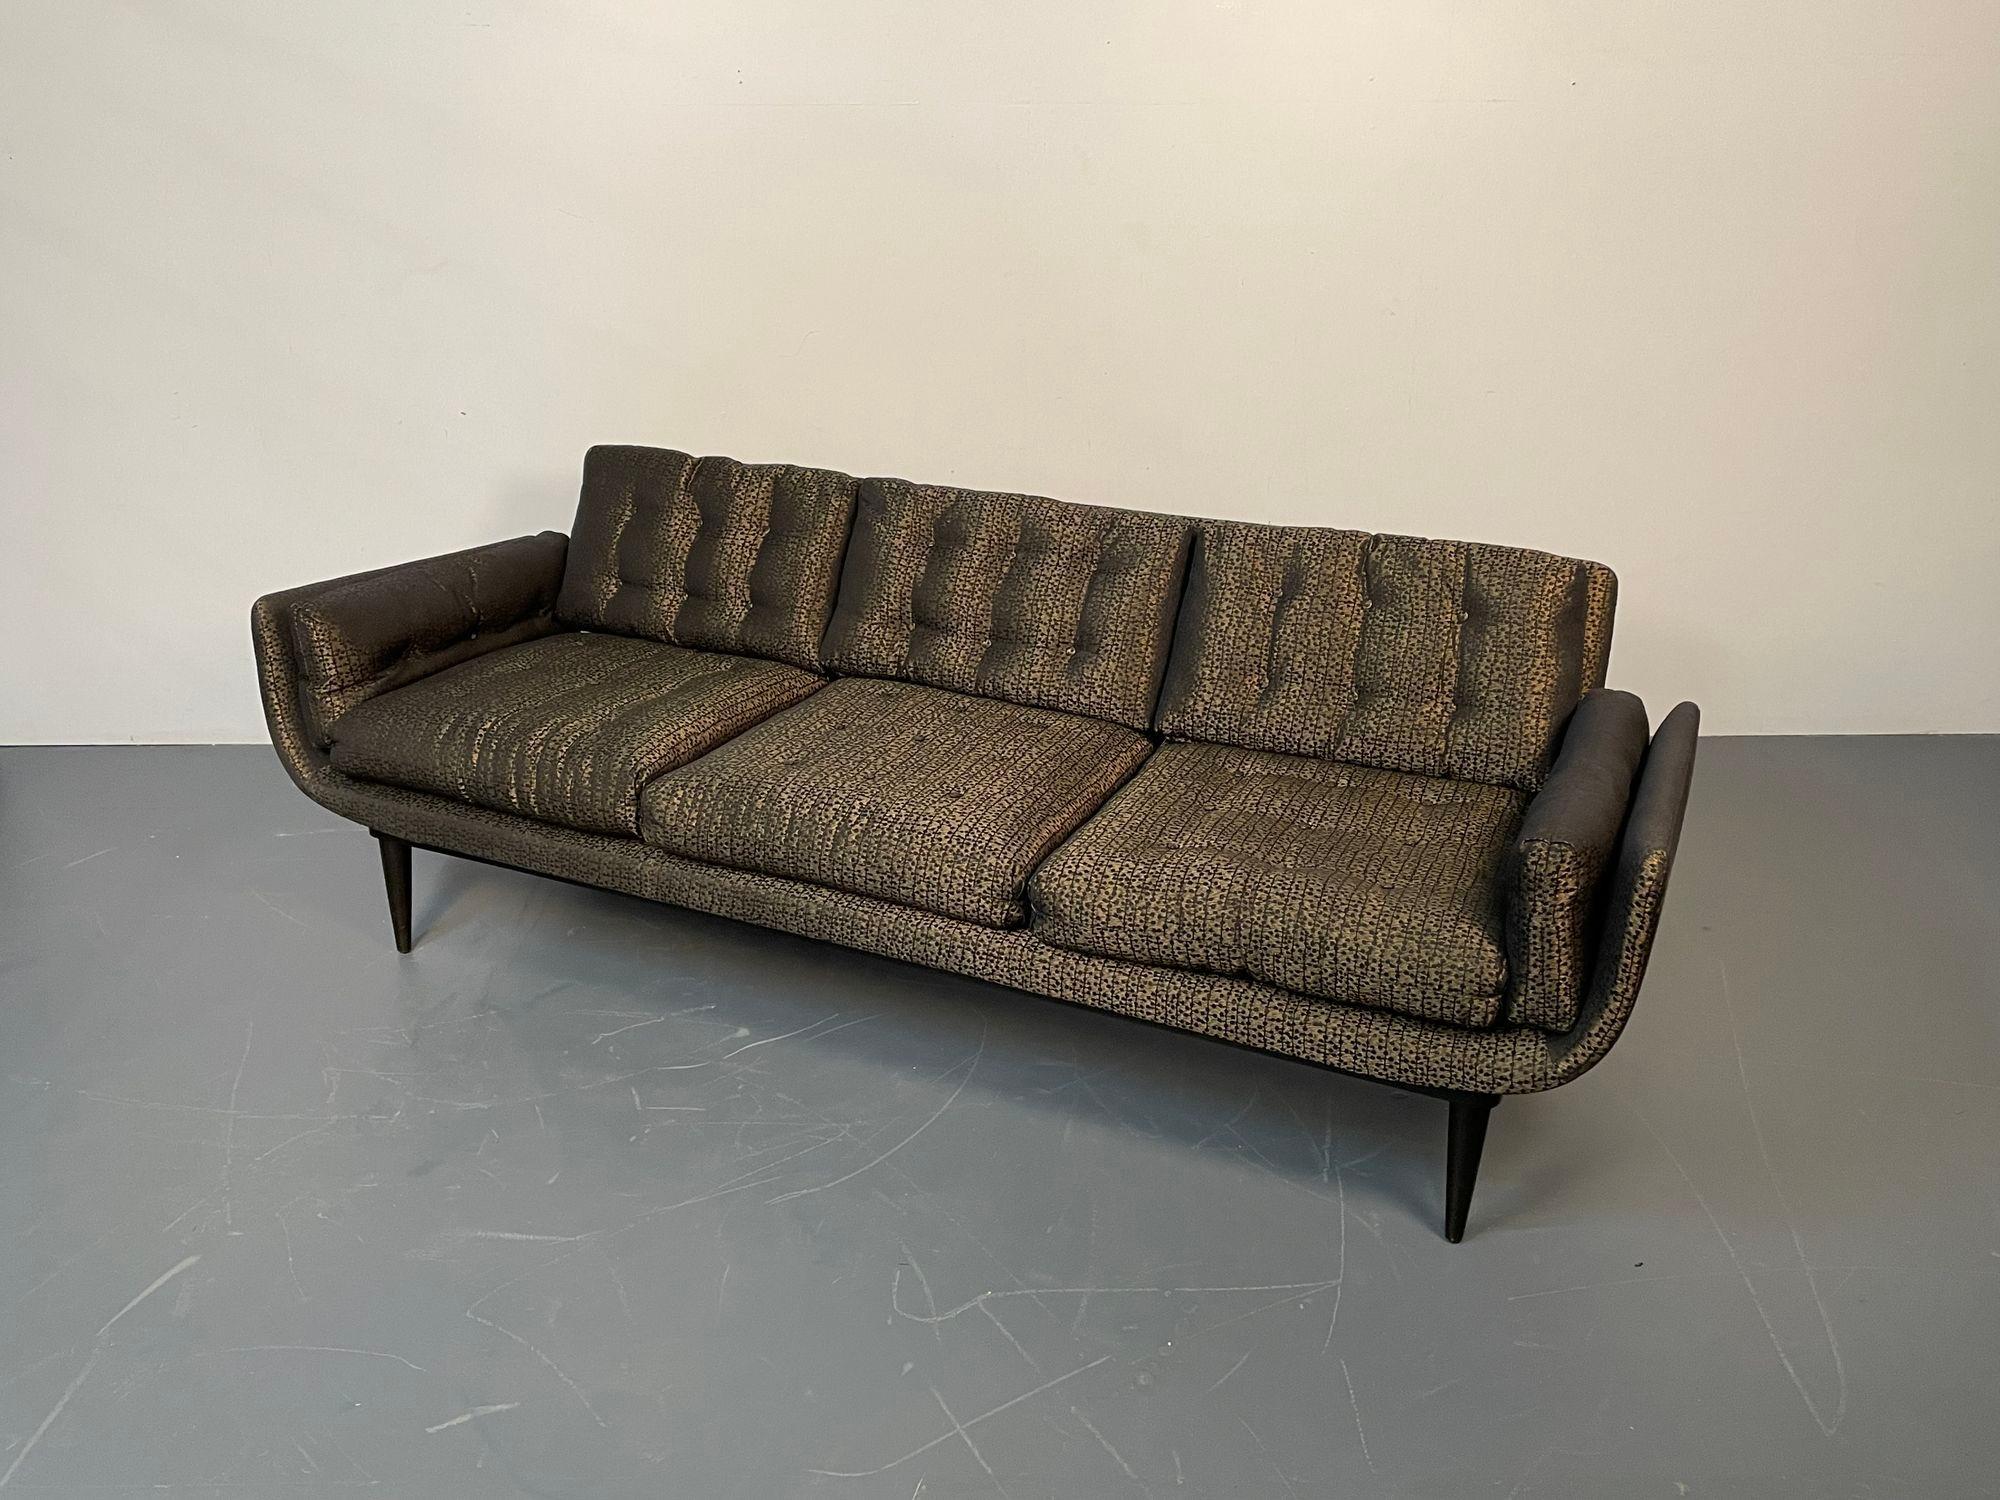 Late 20th Century Mid-Century Modern Curved Sofa / Settee, Adrian Pearsall Style, Three-Seater For Sale